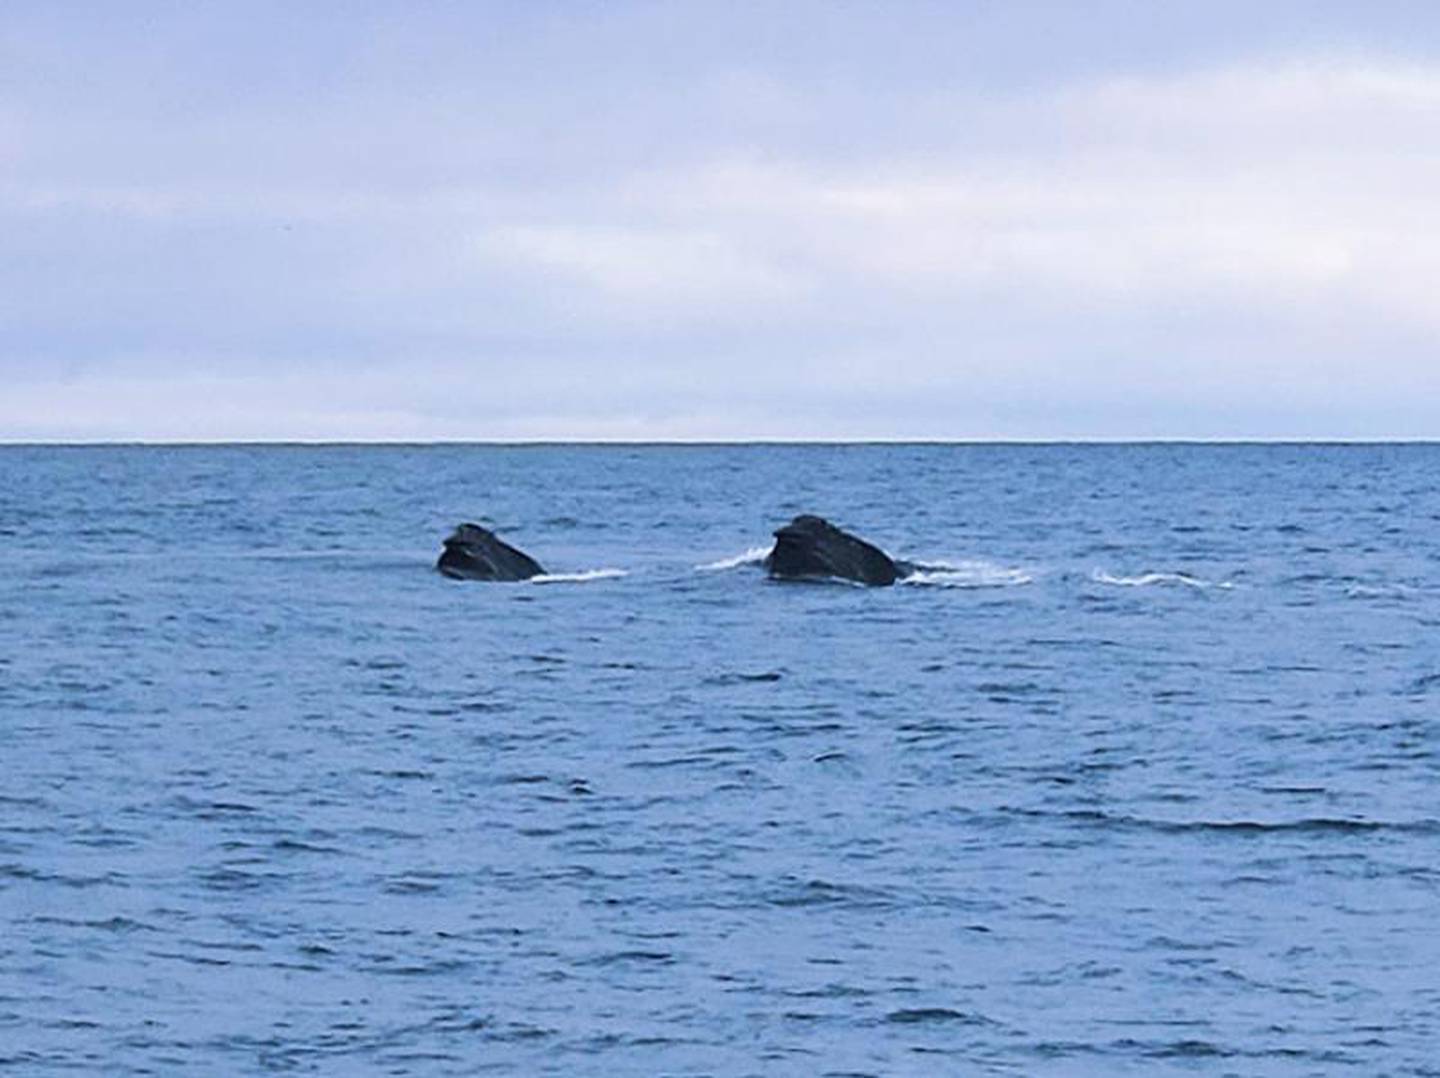 An Alaska fisherman photographed a group of whales. His images may be the first ever taken of the species in the Bering Sea in the winter. - Anchorage Daily News